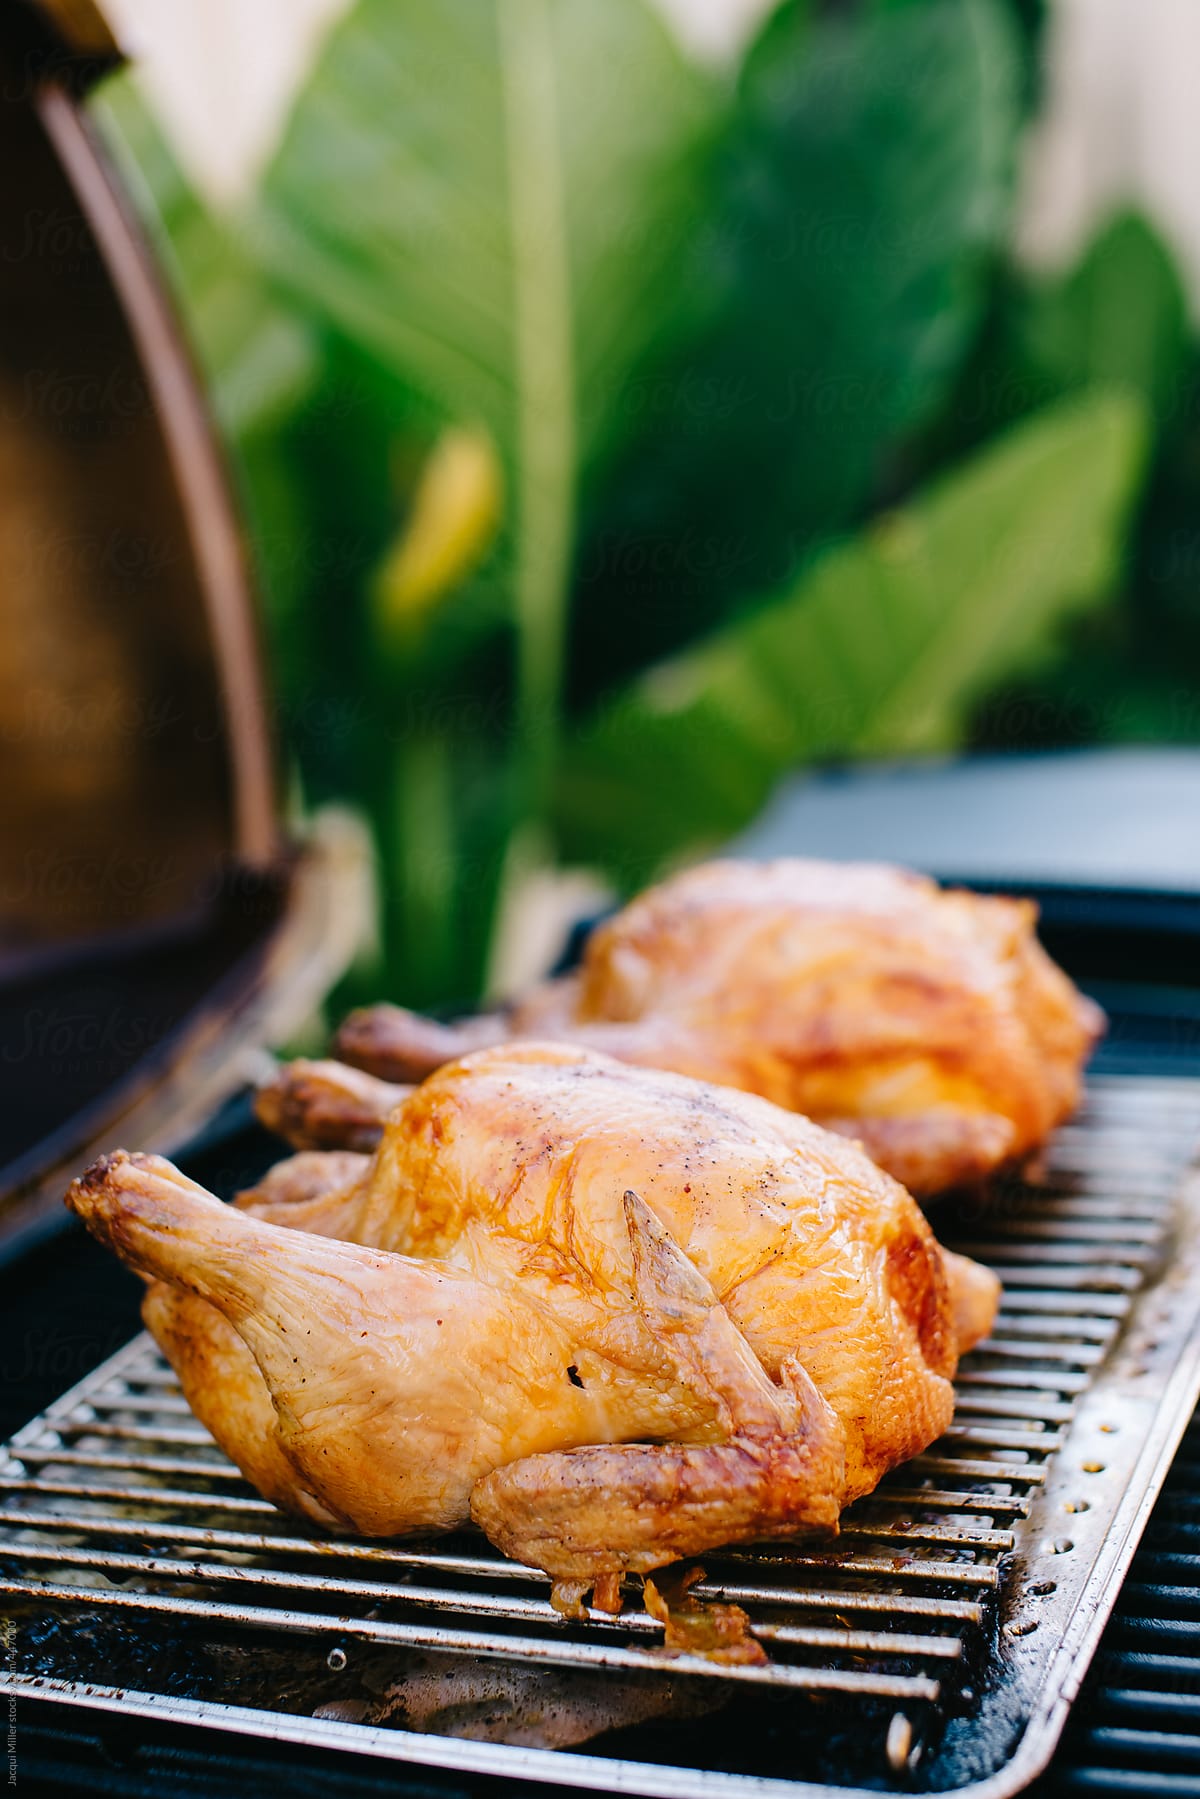 Chicken cooked on an outdoor barbecue